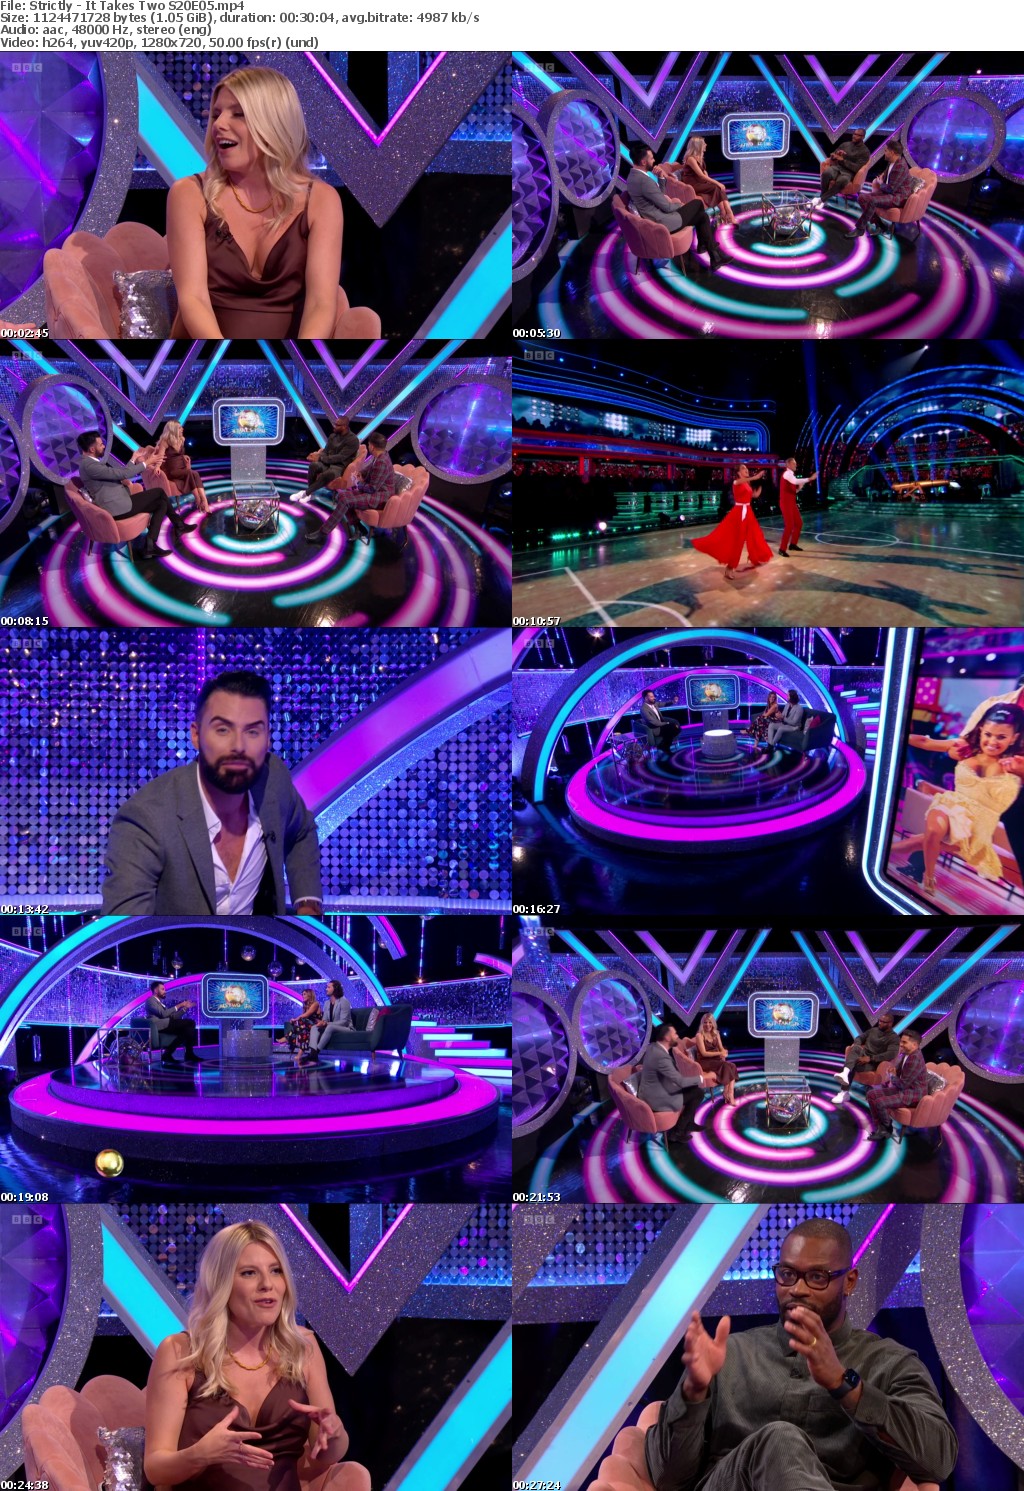 Strictly - It Takes Two S20E05 (1280x720p HD, 50fps, soft Eng subs)